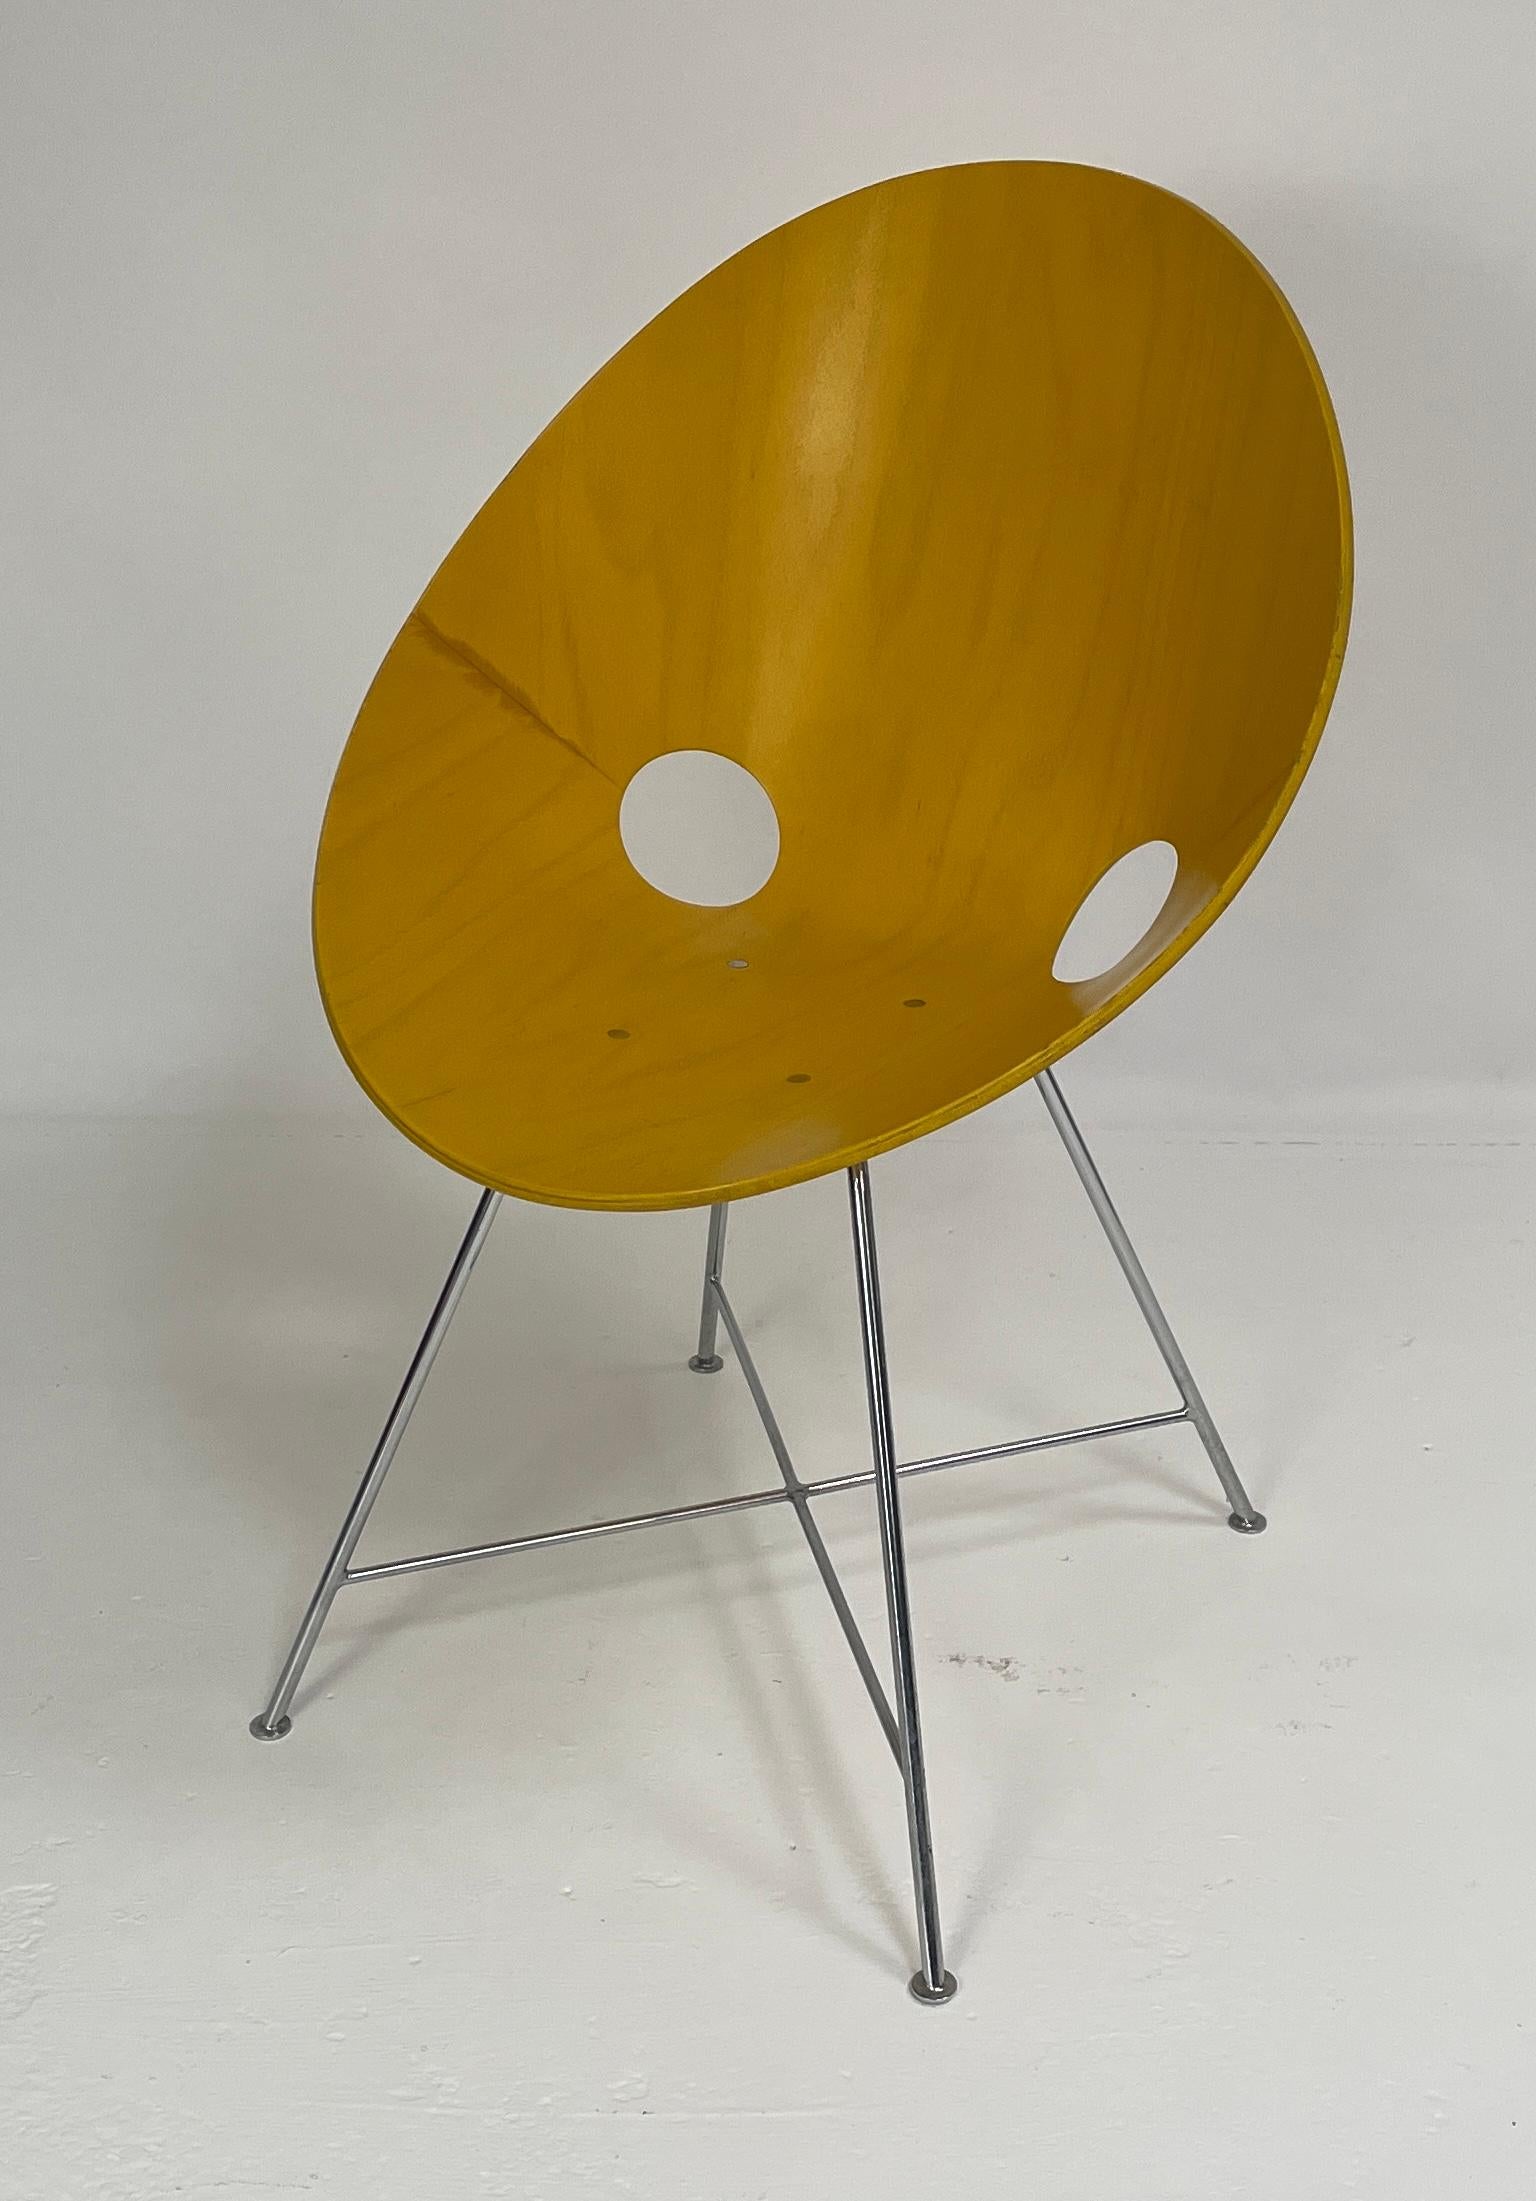 The ST 664 chair designed by Eddie Harlis in 1954. Thonet manufactured the chairs in Germany. These chairs are no longer produced. The chair has a yellow stained finish and are made from bent plywood (beech). The legs are chromed steel. In good